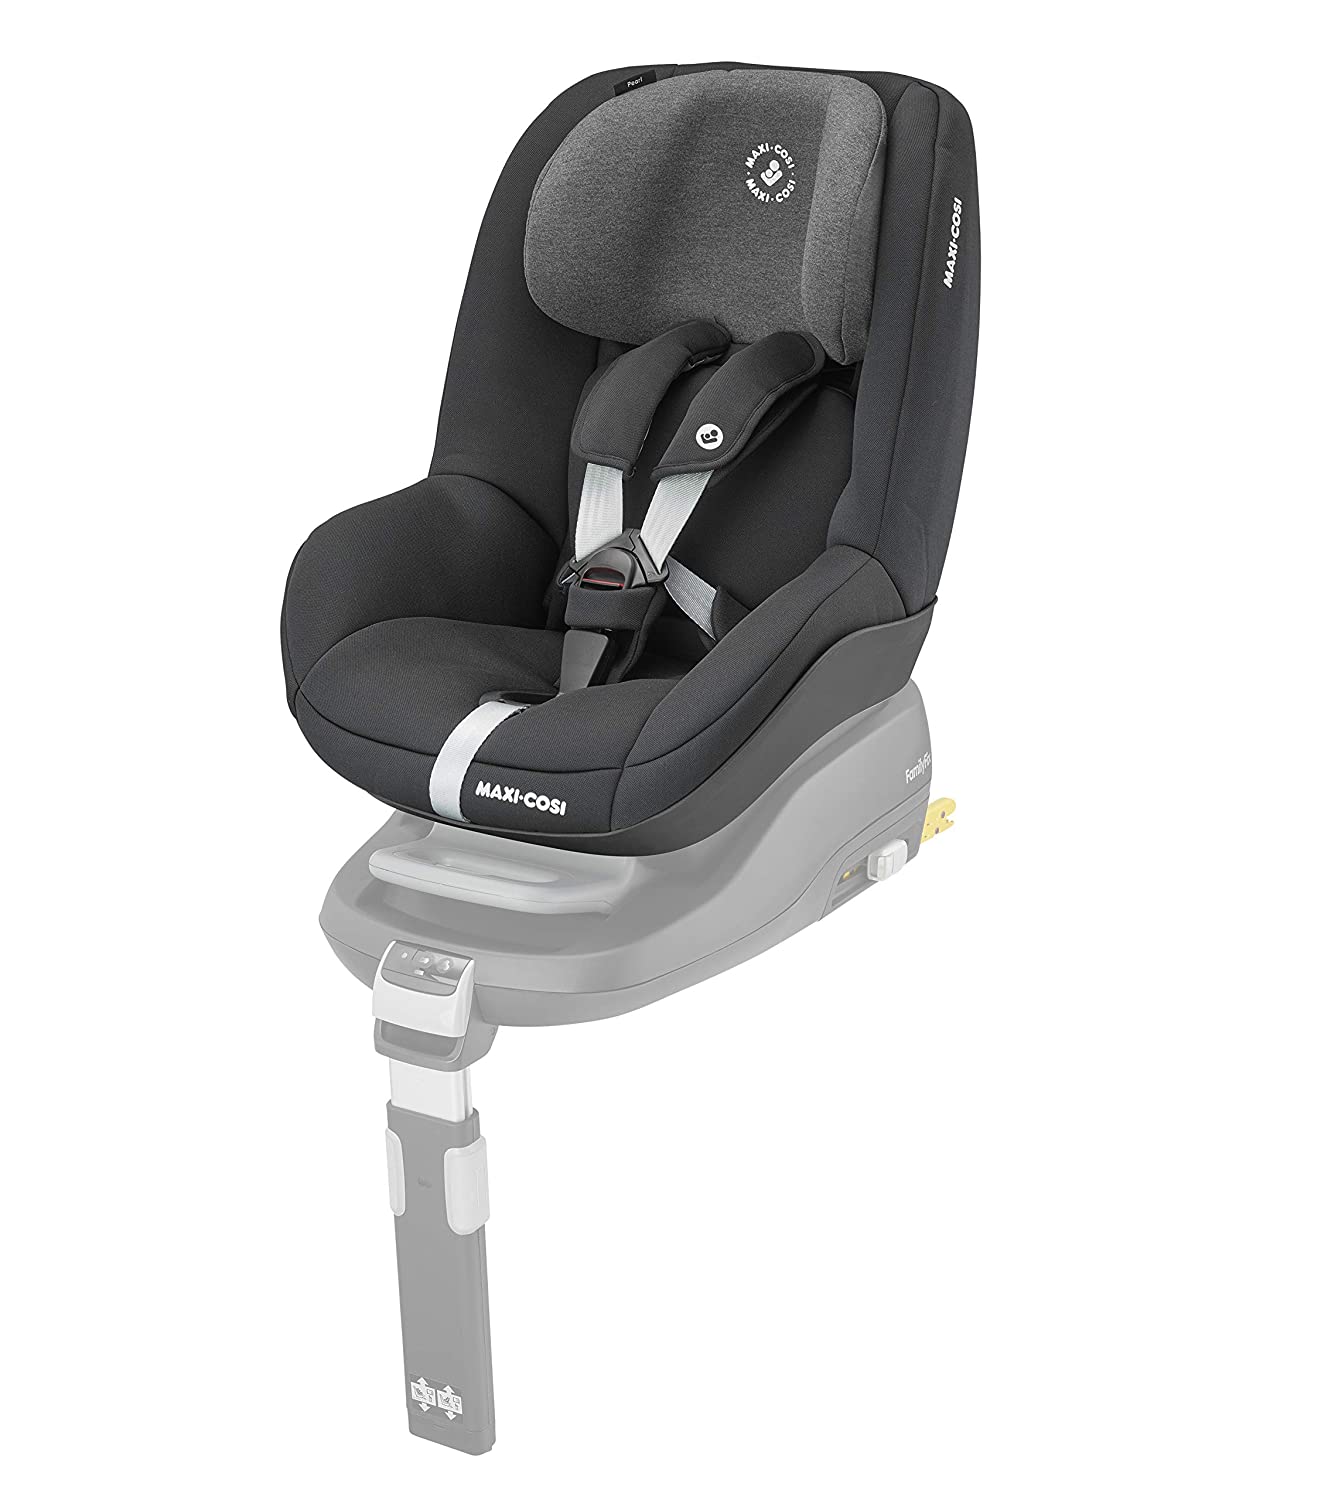 Maxi-Cosi Pearl child seat with 5 sitting and reclining positions - Group 1 car seat (9-18 kg) - Usable from 6 months to approx. 4 years.